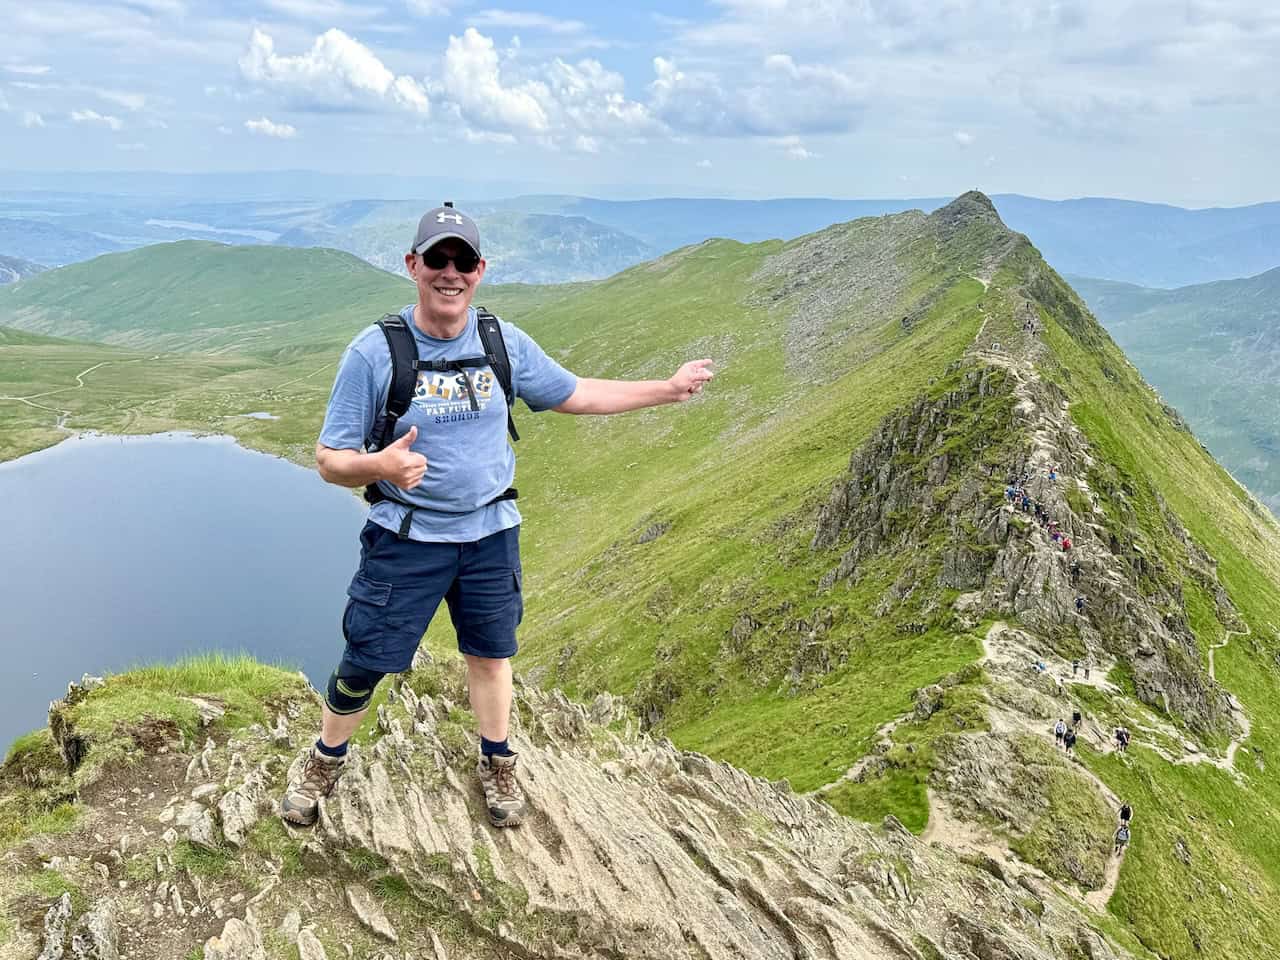 As we near the top, Jeff points out our route across Striding Edge. Easier paths below the ridge’s top offer an alternative for those seeking a less challenging route.